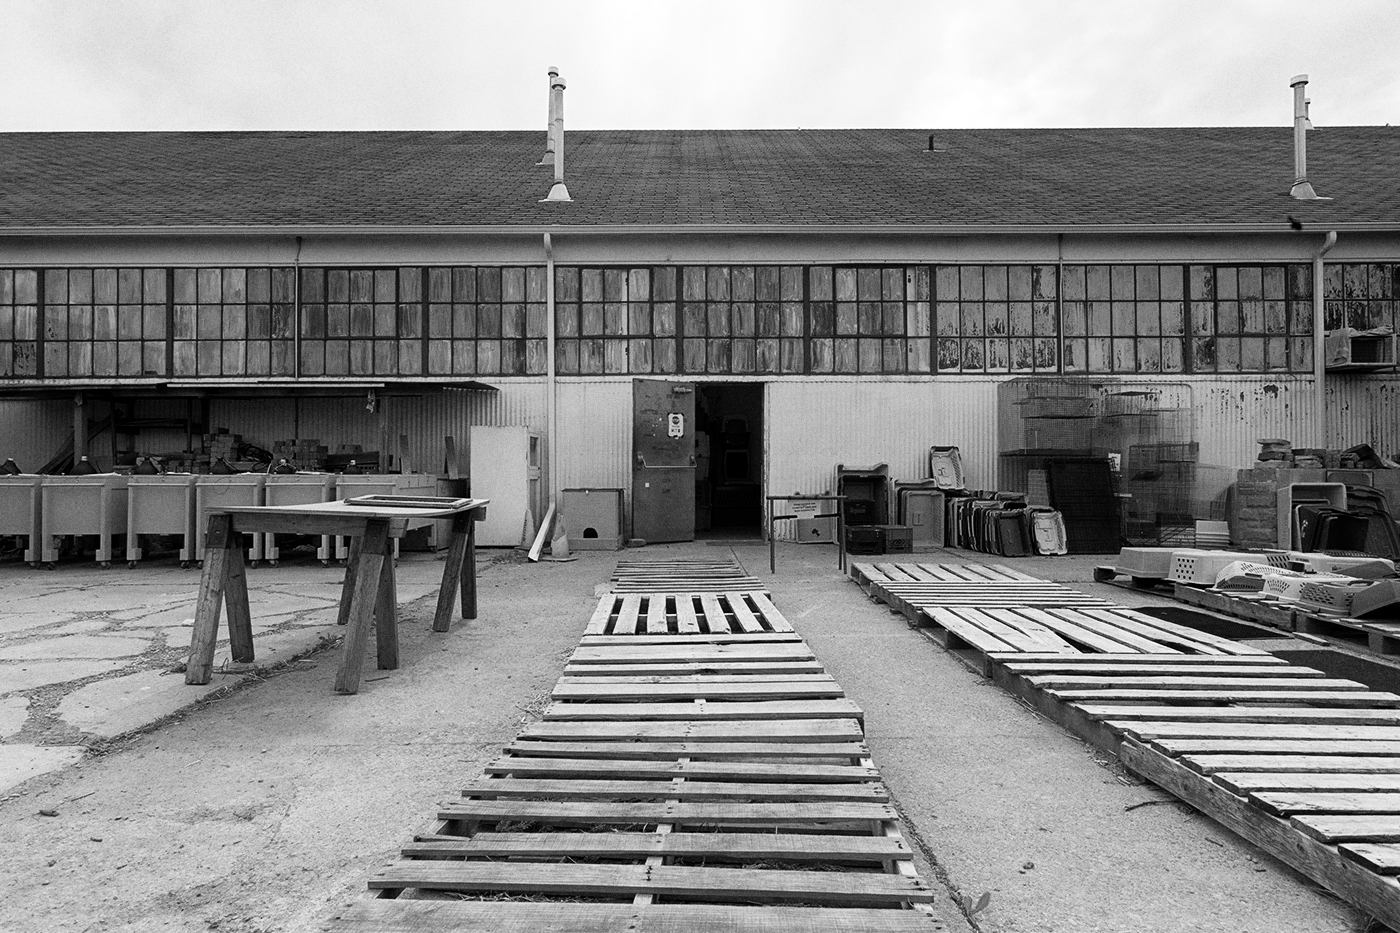 A large yard in front of low building, there are many wooden pallets in the yard.